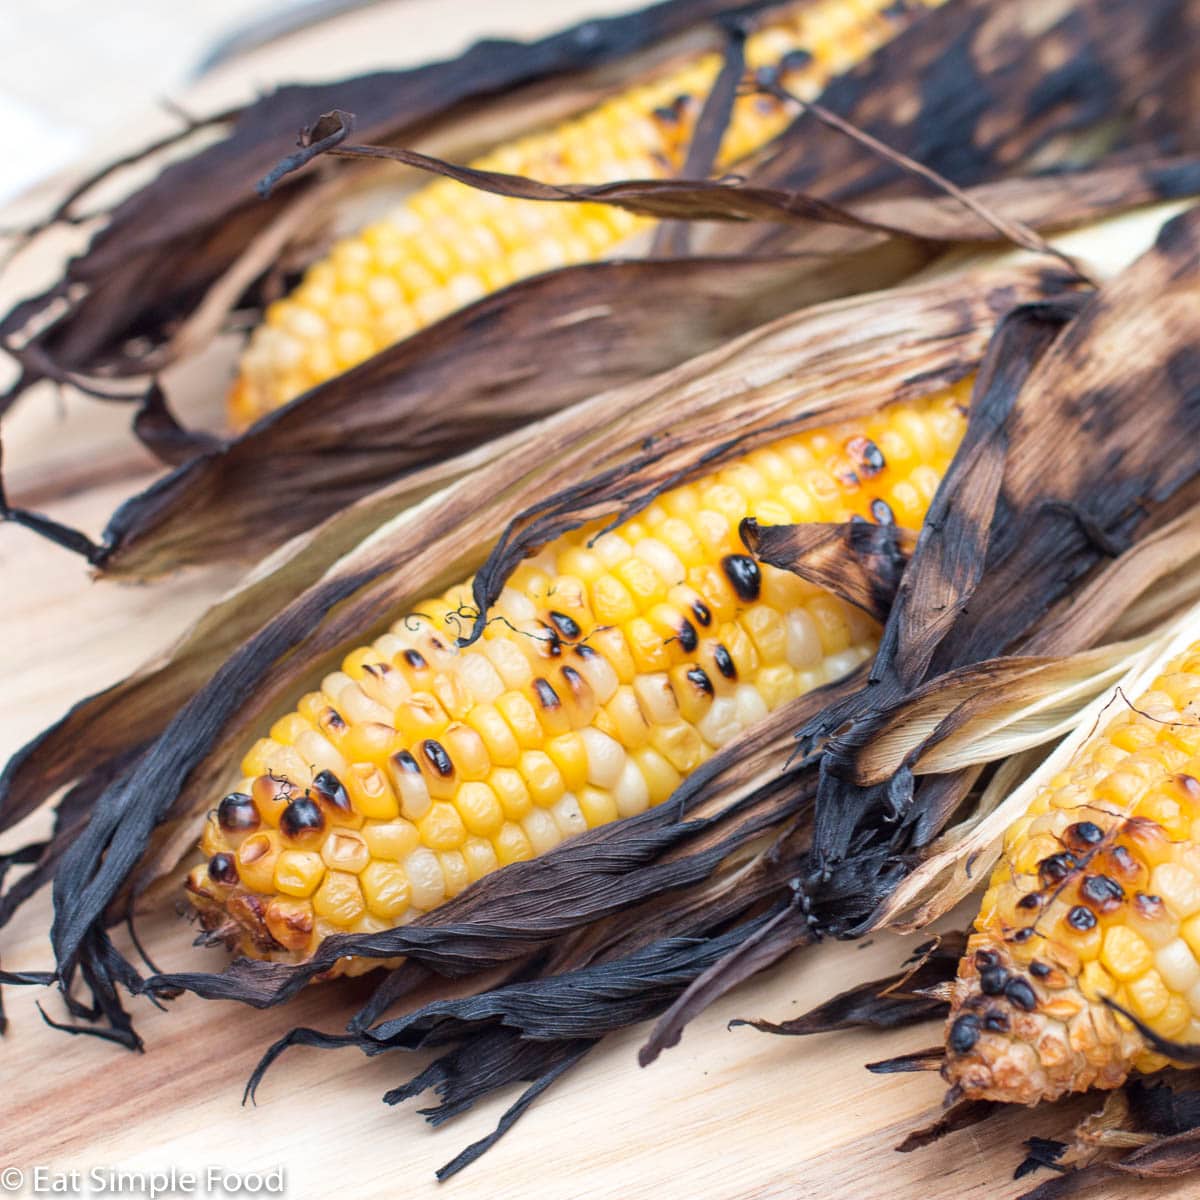 Easy Grilled Corn On The Cob With Husk Recipe Eat Simple Food,Patty Pan Squash Varieties